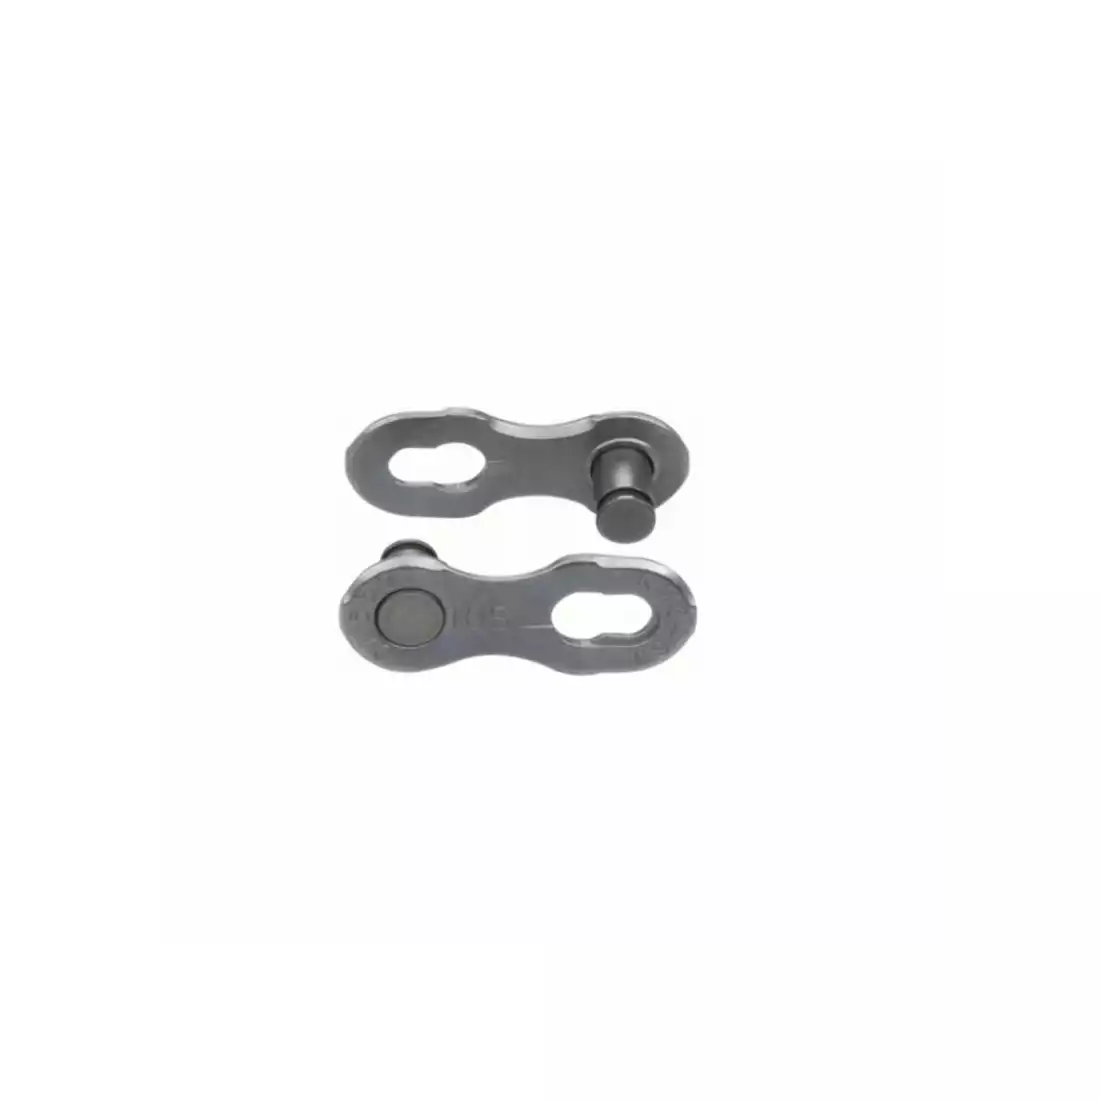 KMC CL-559 10-speed chain clip, silver